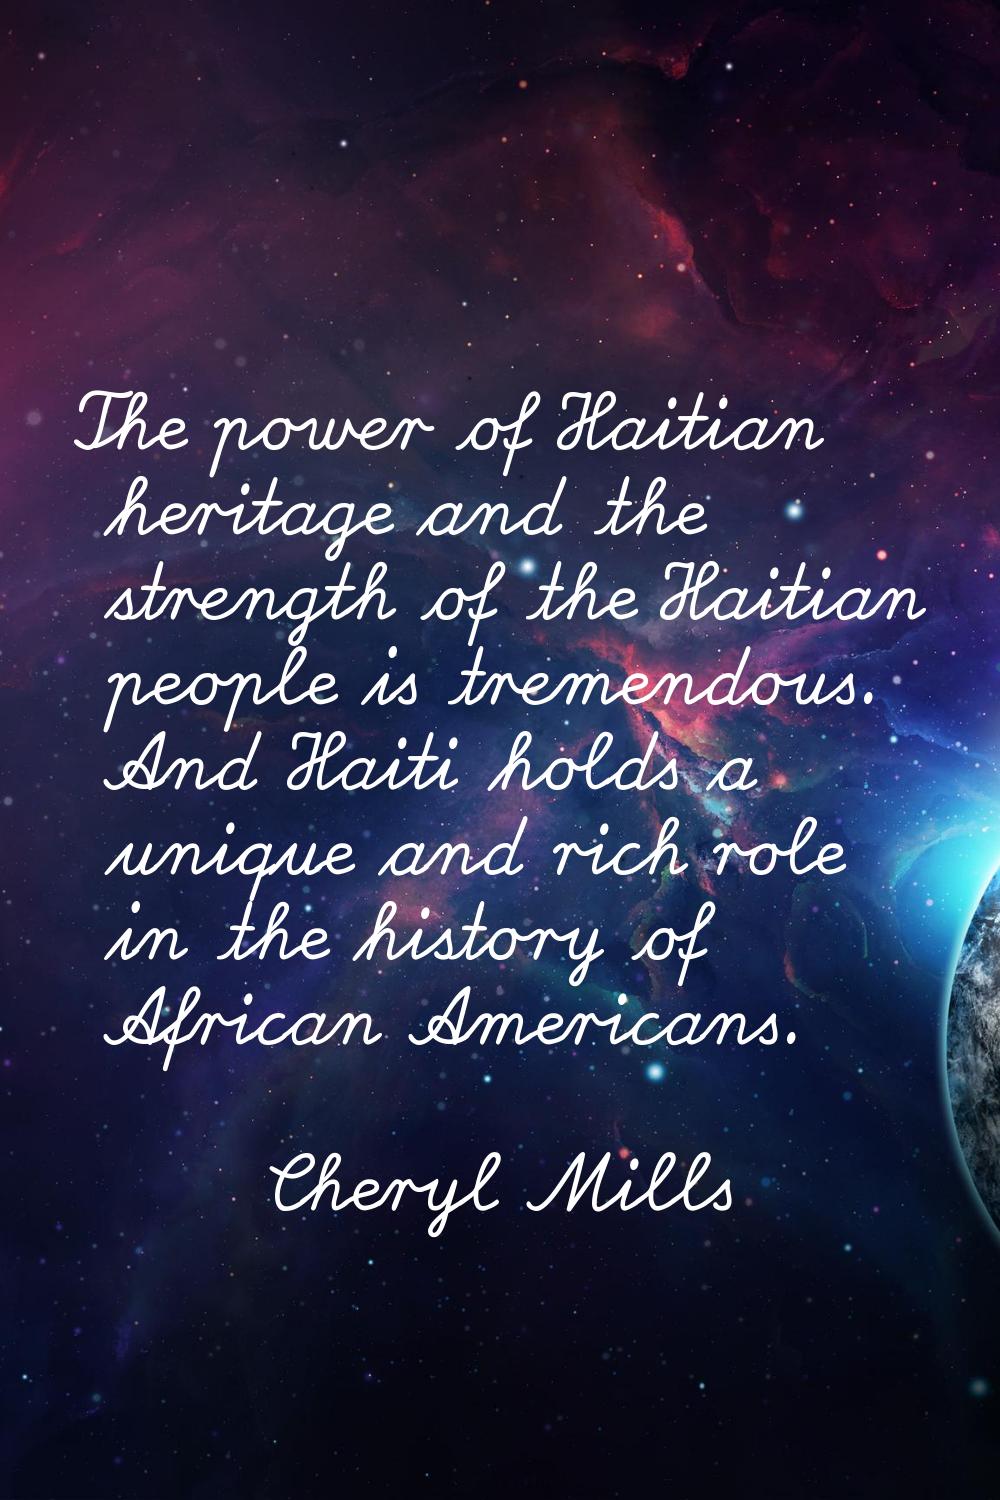 The power of Haitian heritage and the strength of the Haitian people is tremendous. And Haiti holds